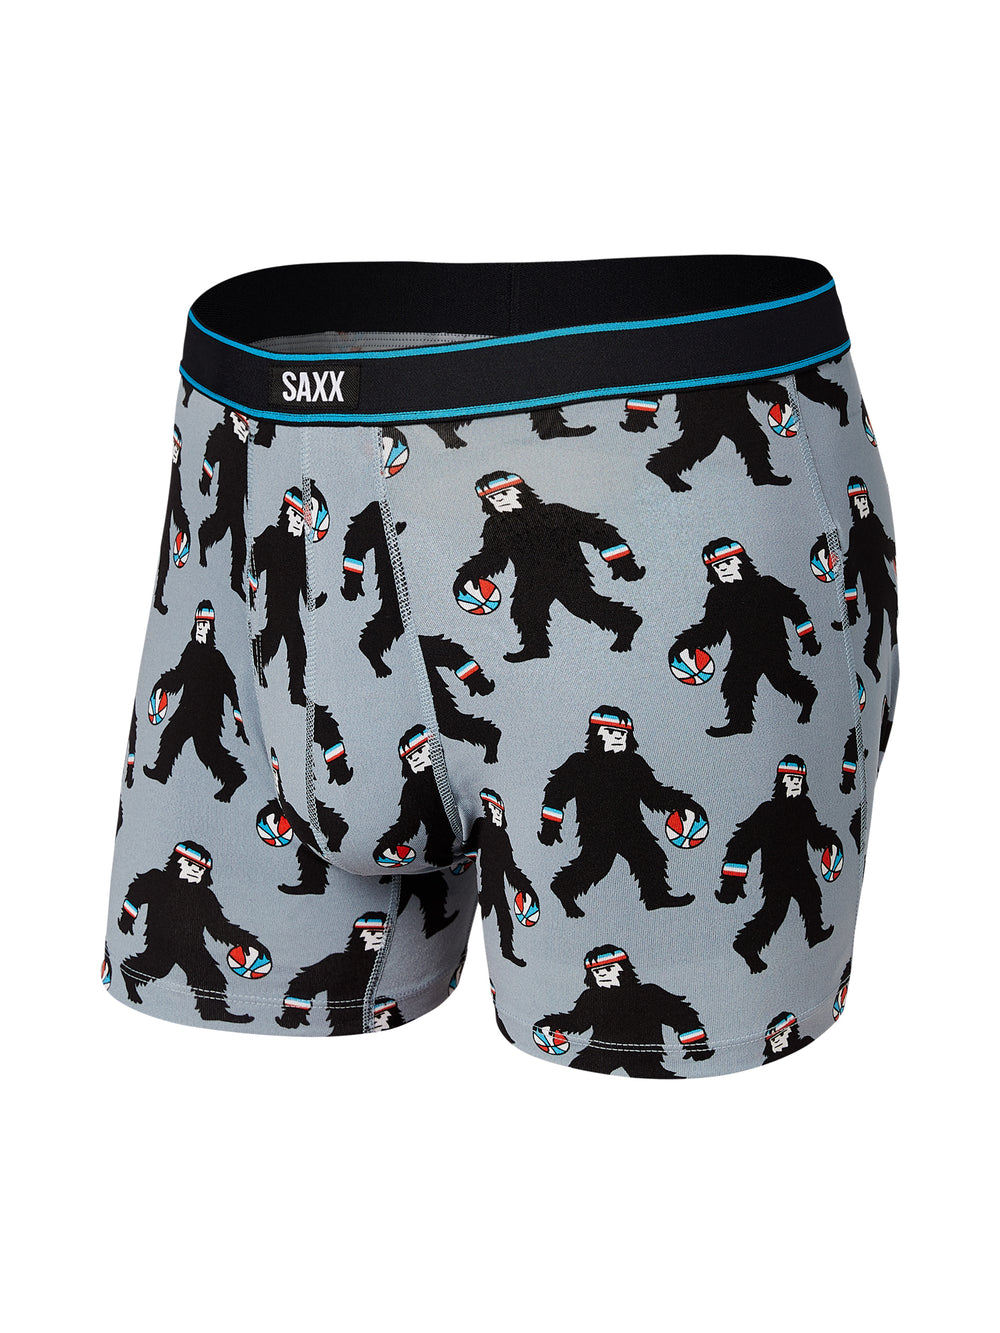 SAXX DAYTRIPPER BOXER BRIEF - HARRY & HOOPS - CLEARANCE